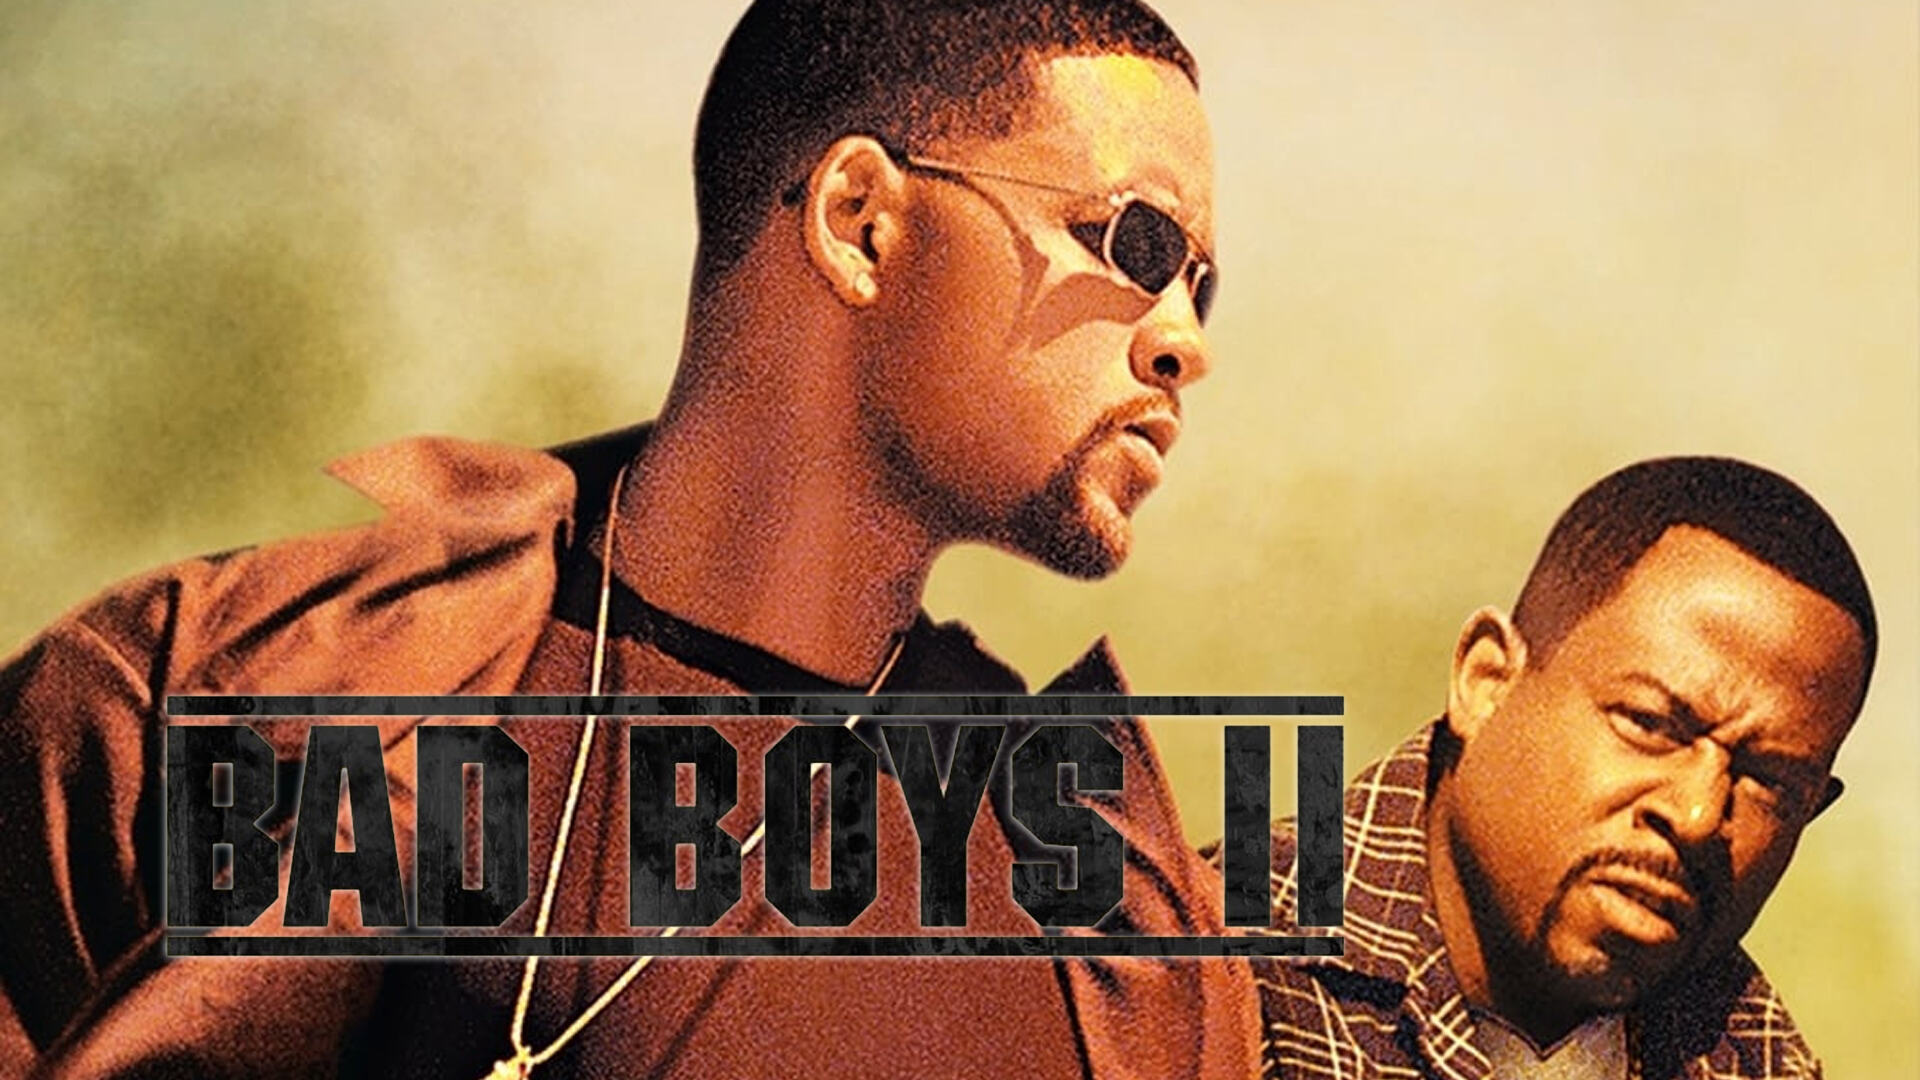 47 Facts about the movie Bad Boys II - Facts.net